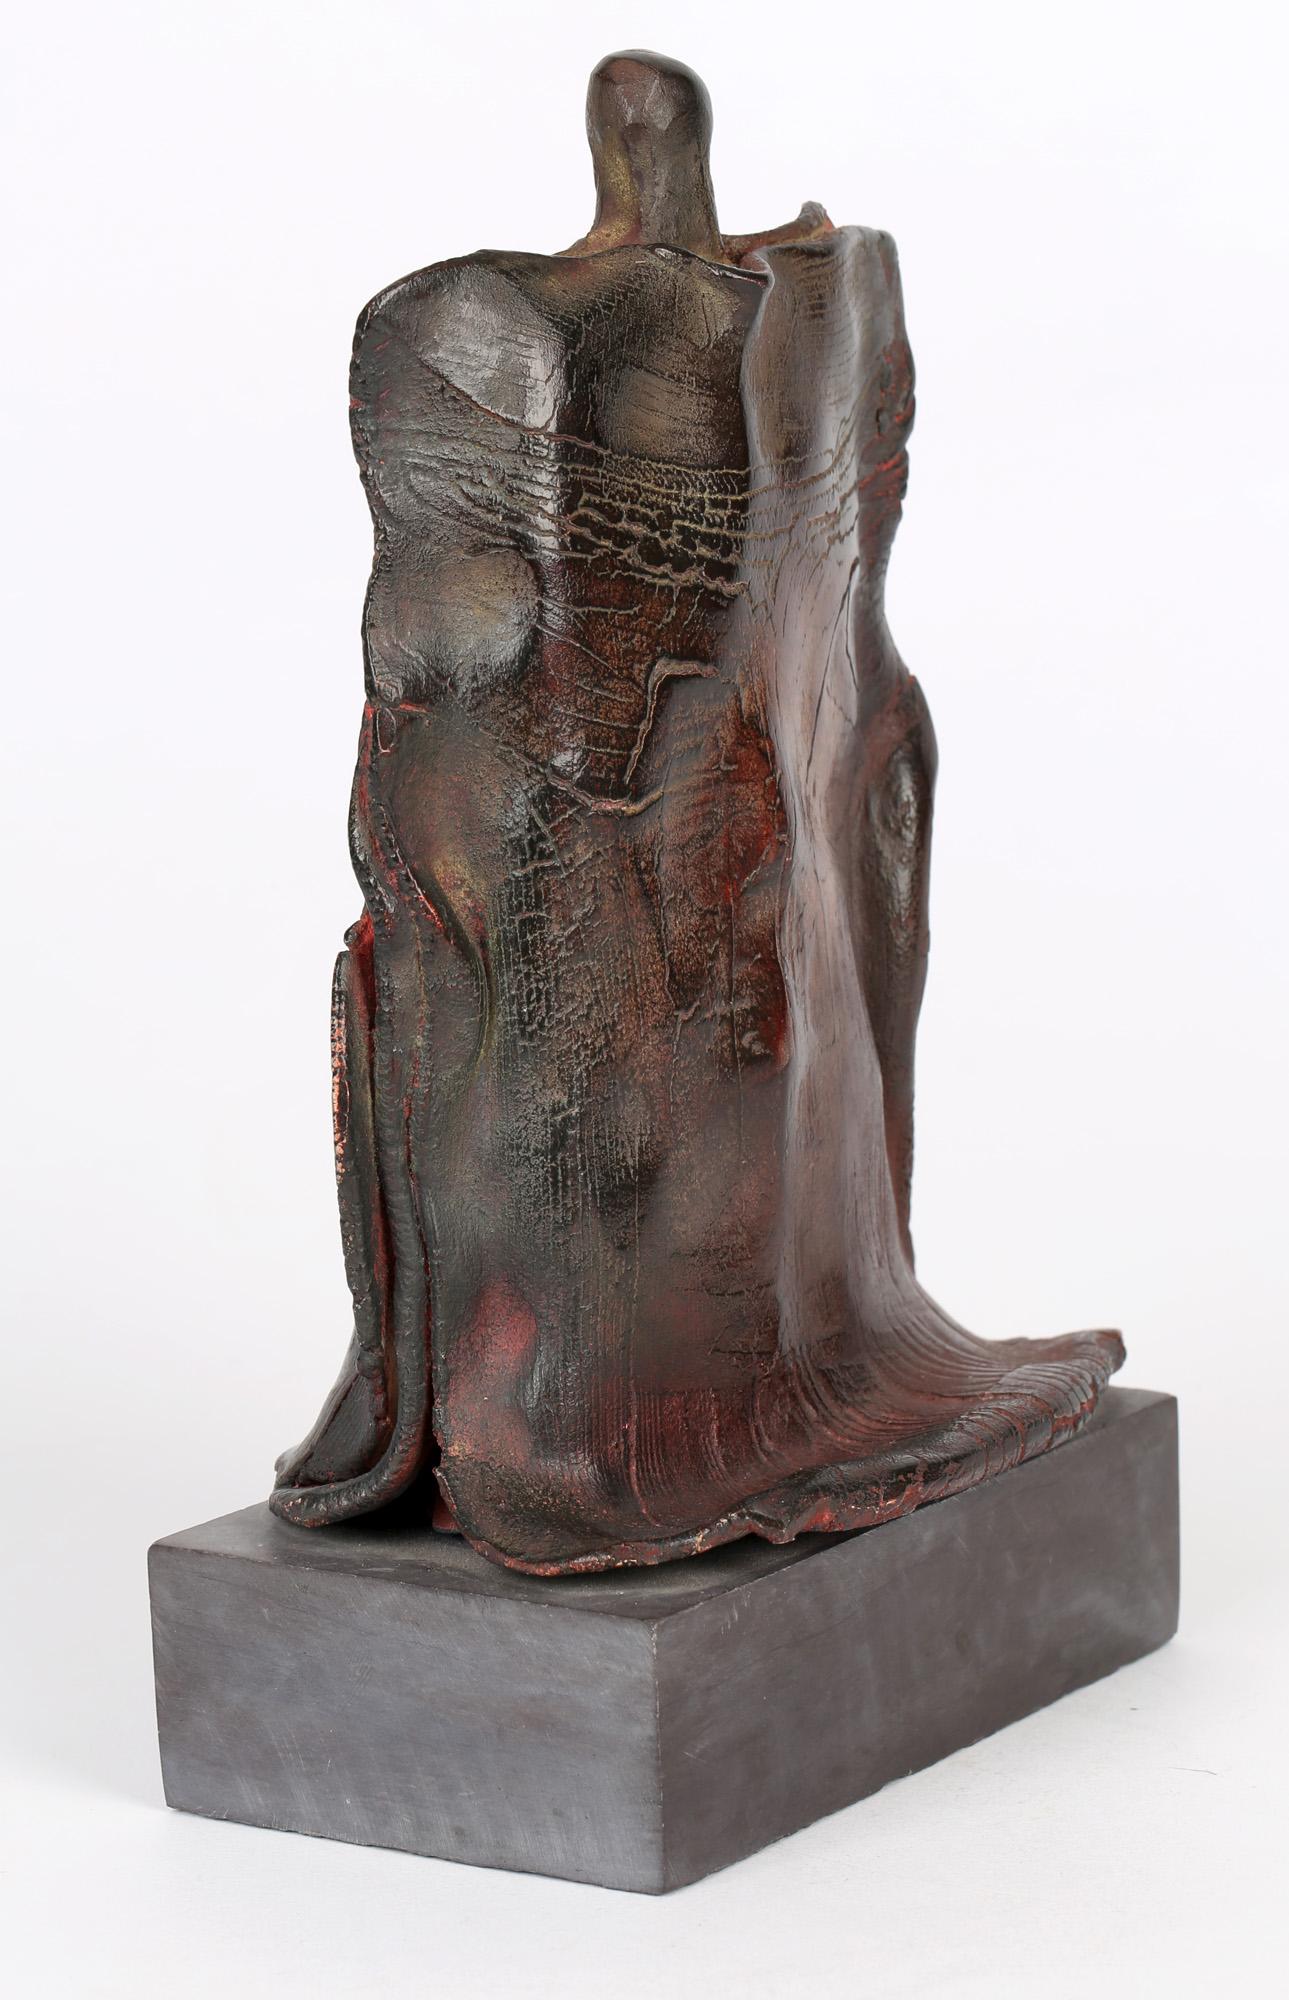 A very stylish studio pottery sculpture titled Mother and Child by renowned potter Peter Hayes and made around 1996. The sculpture is mounted on a rectangular slate base and is abstract in form with a mother holding her arm around a child who seems